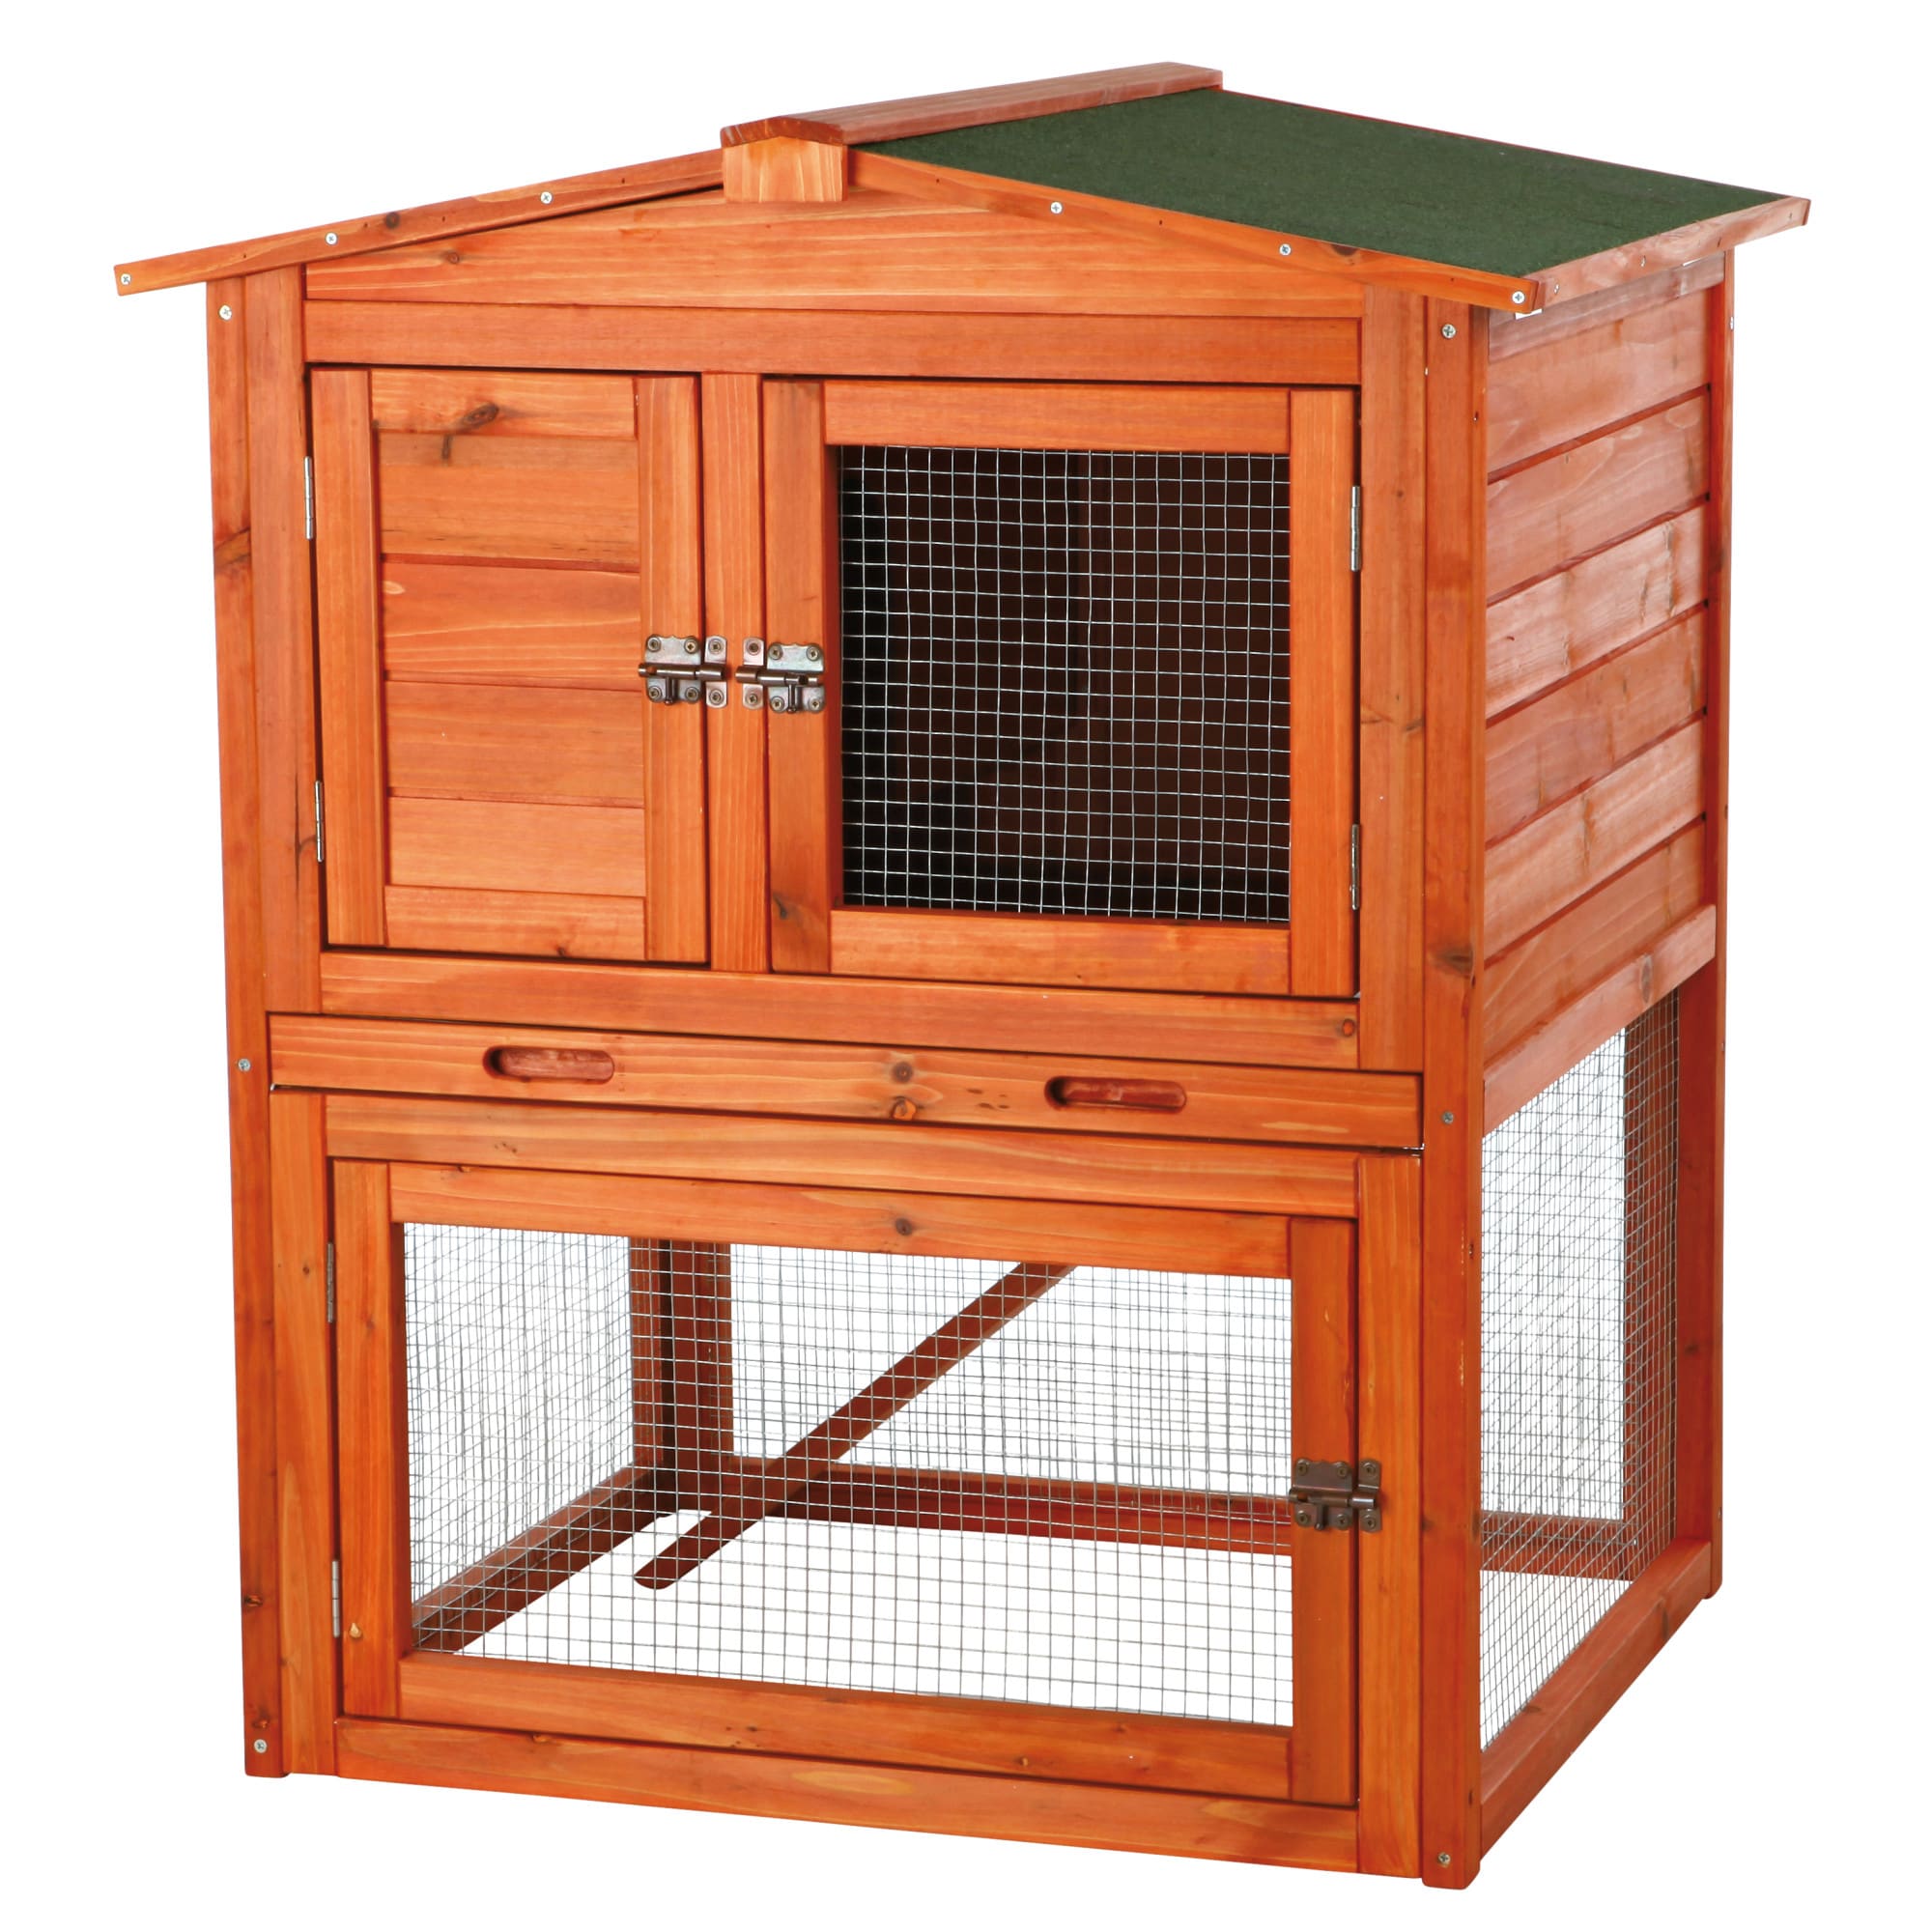 TRIXIE Natura Two Story Animal Hutch with Gabled Roof, 